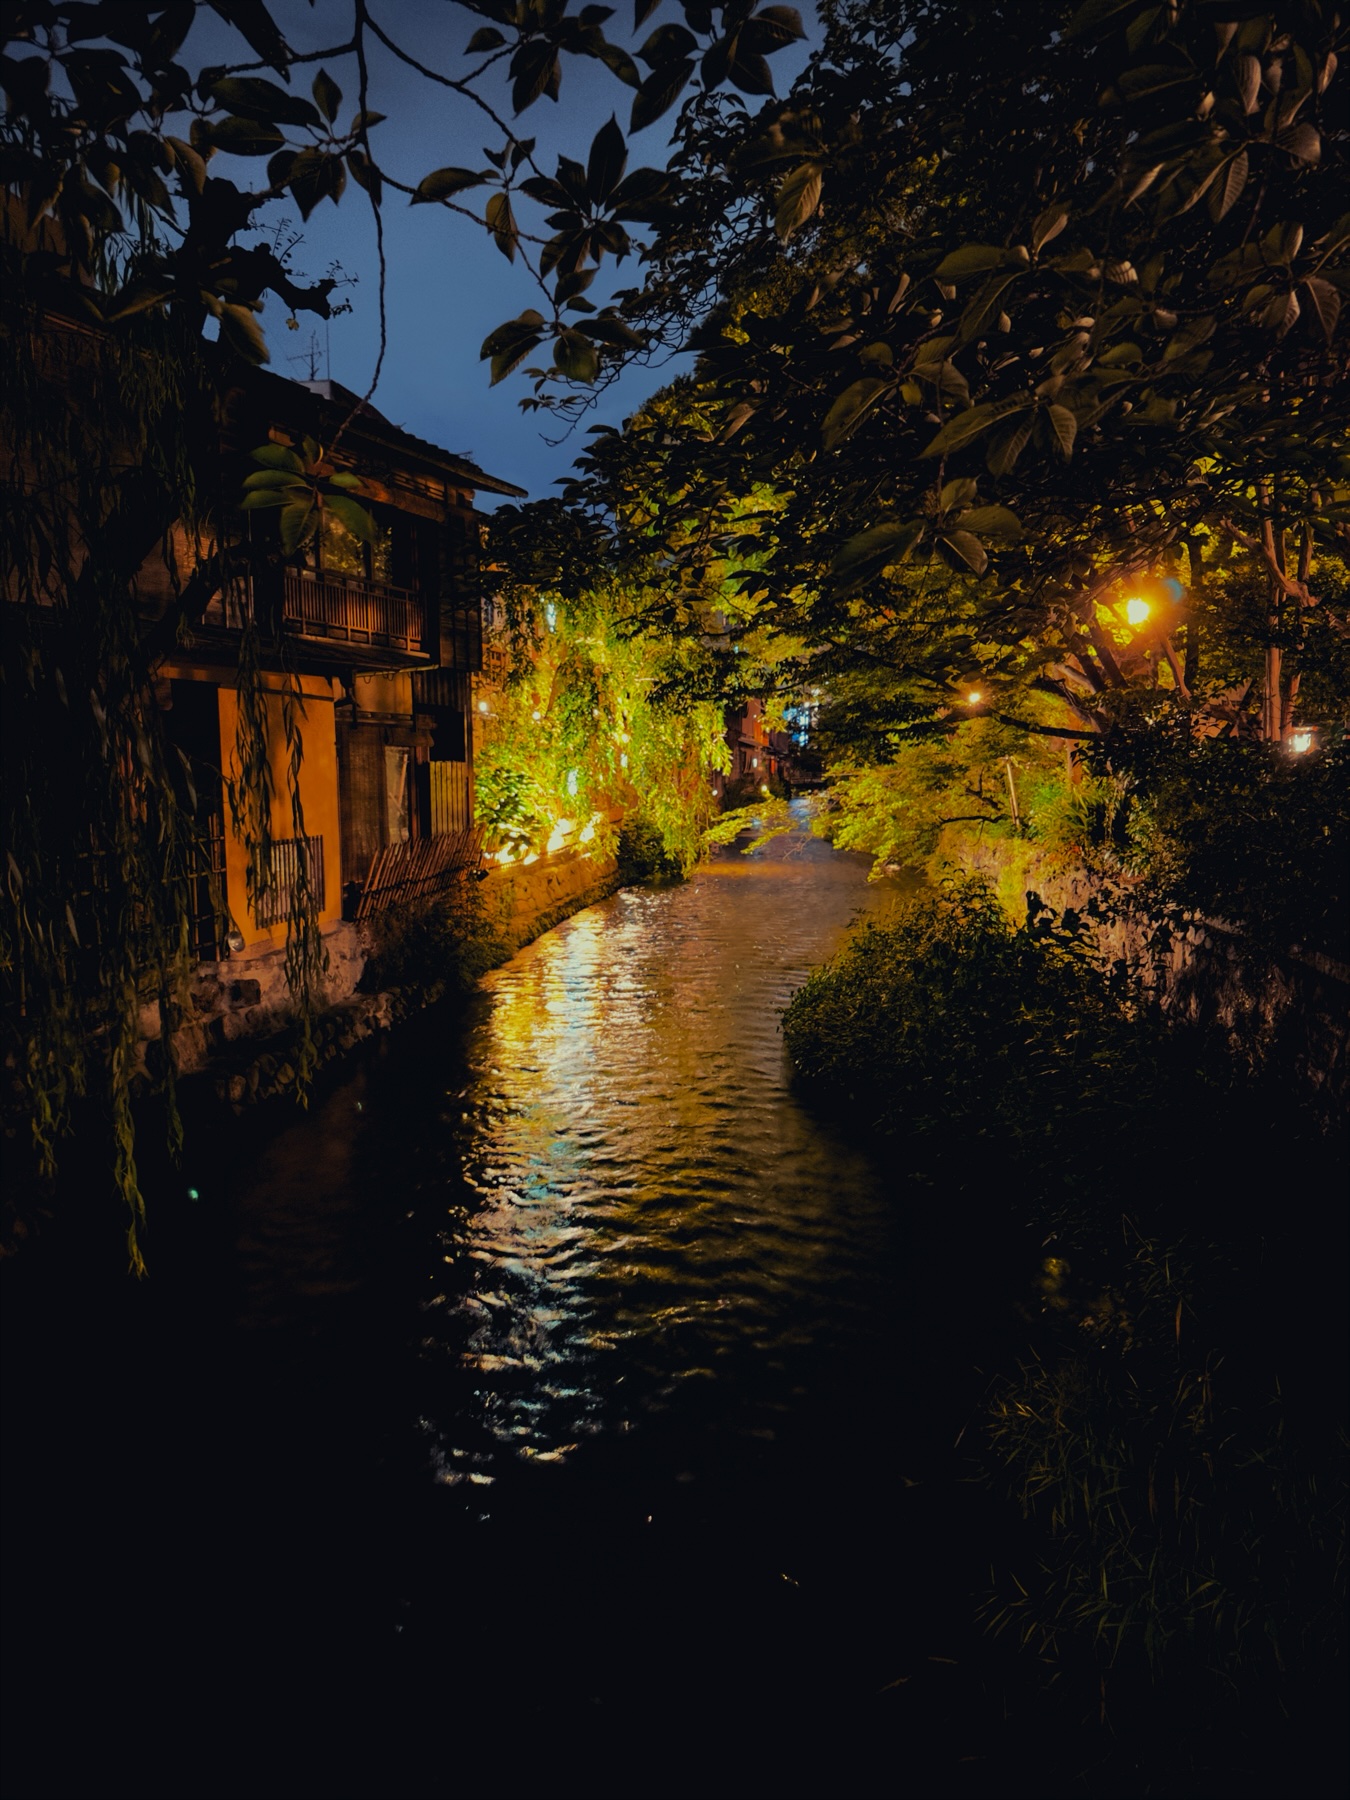 A river in Kyoto&rsquo;s old town at night. Light reflecting off the surface